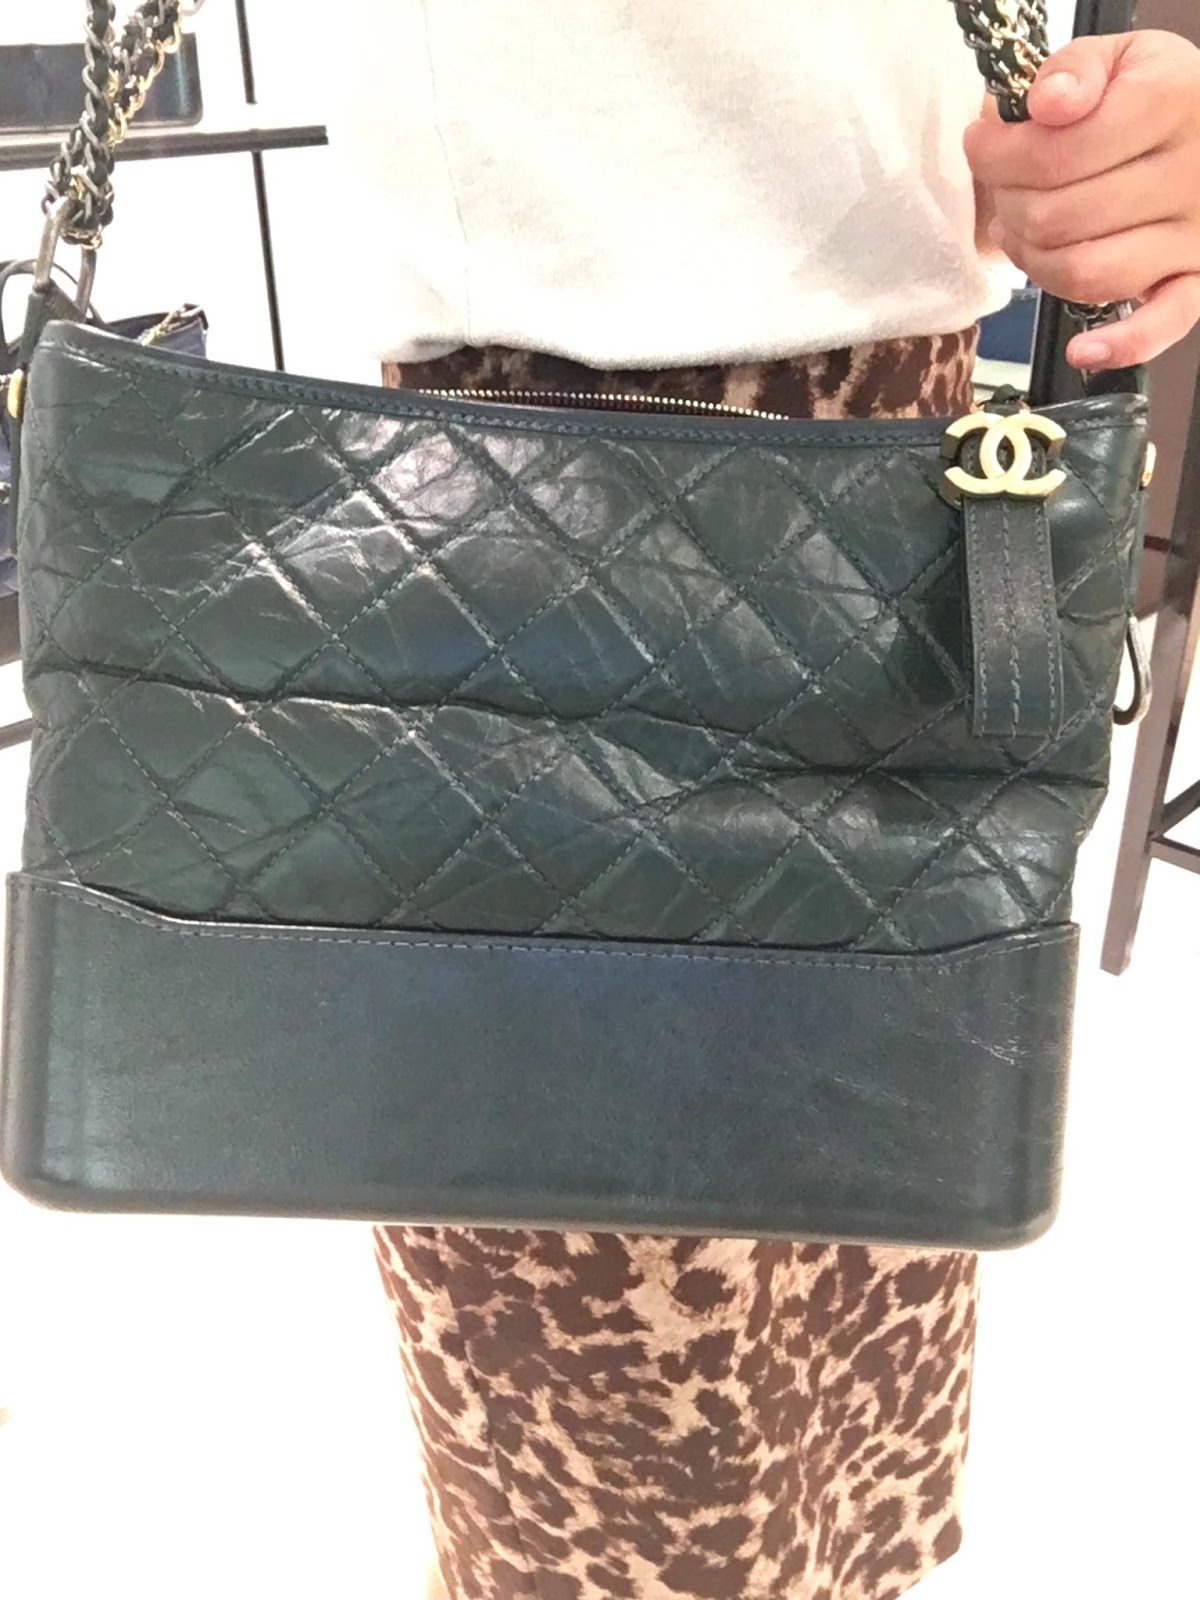 Chanel Gabrielle Small Bag Review. Wear and Tear! Will I Buy it Again?  Watch before Buying